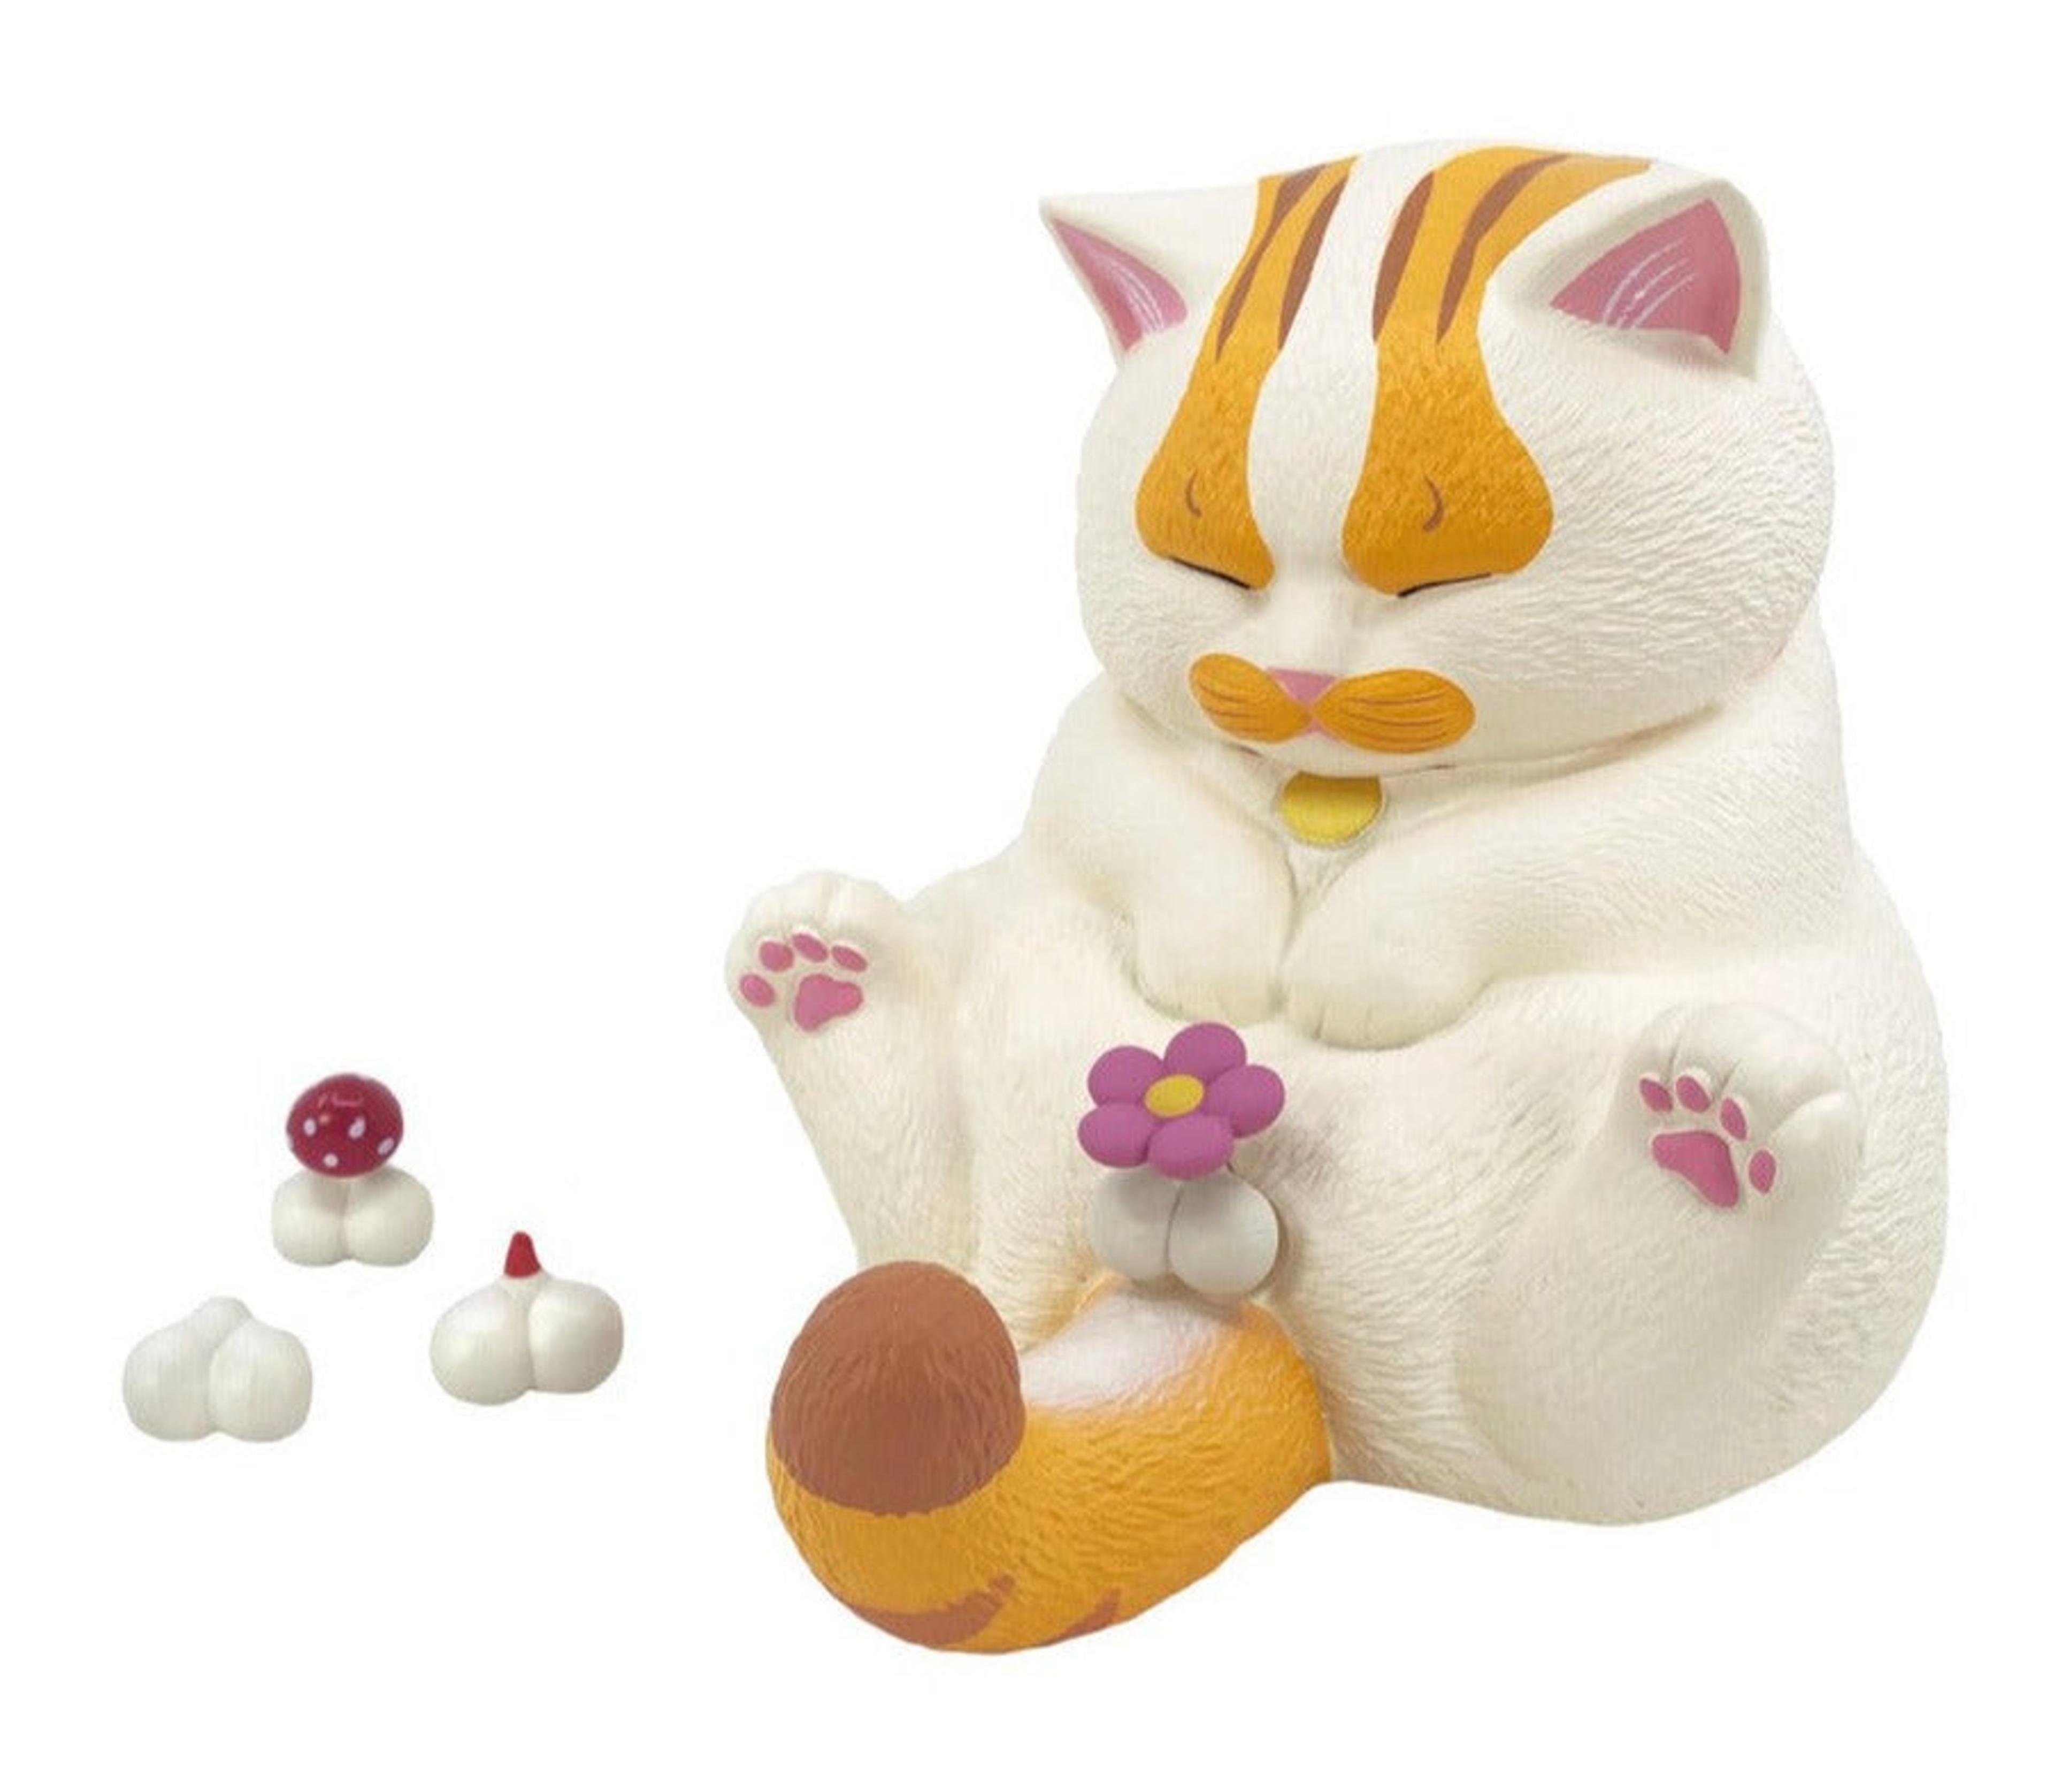 Crotch Staring Cats Vinyl Figure (Orange and White Shorthair) by